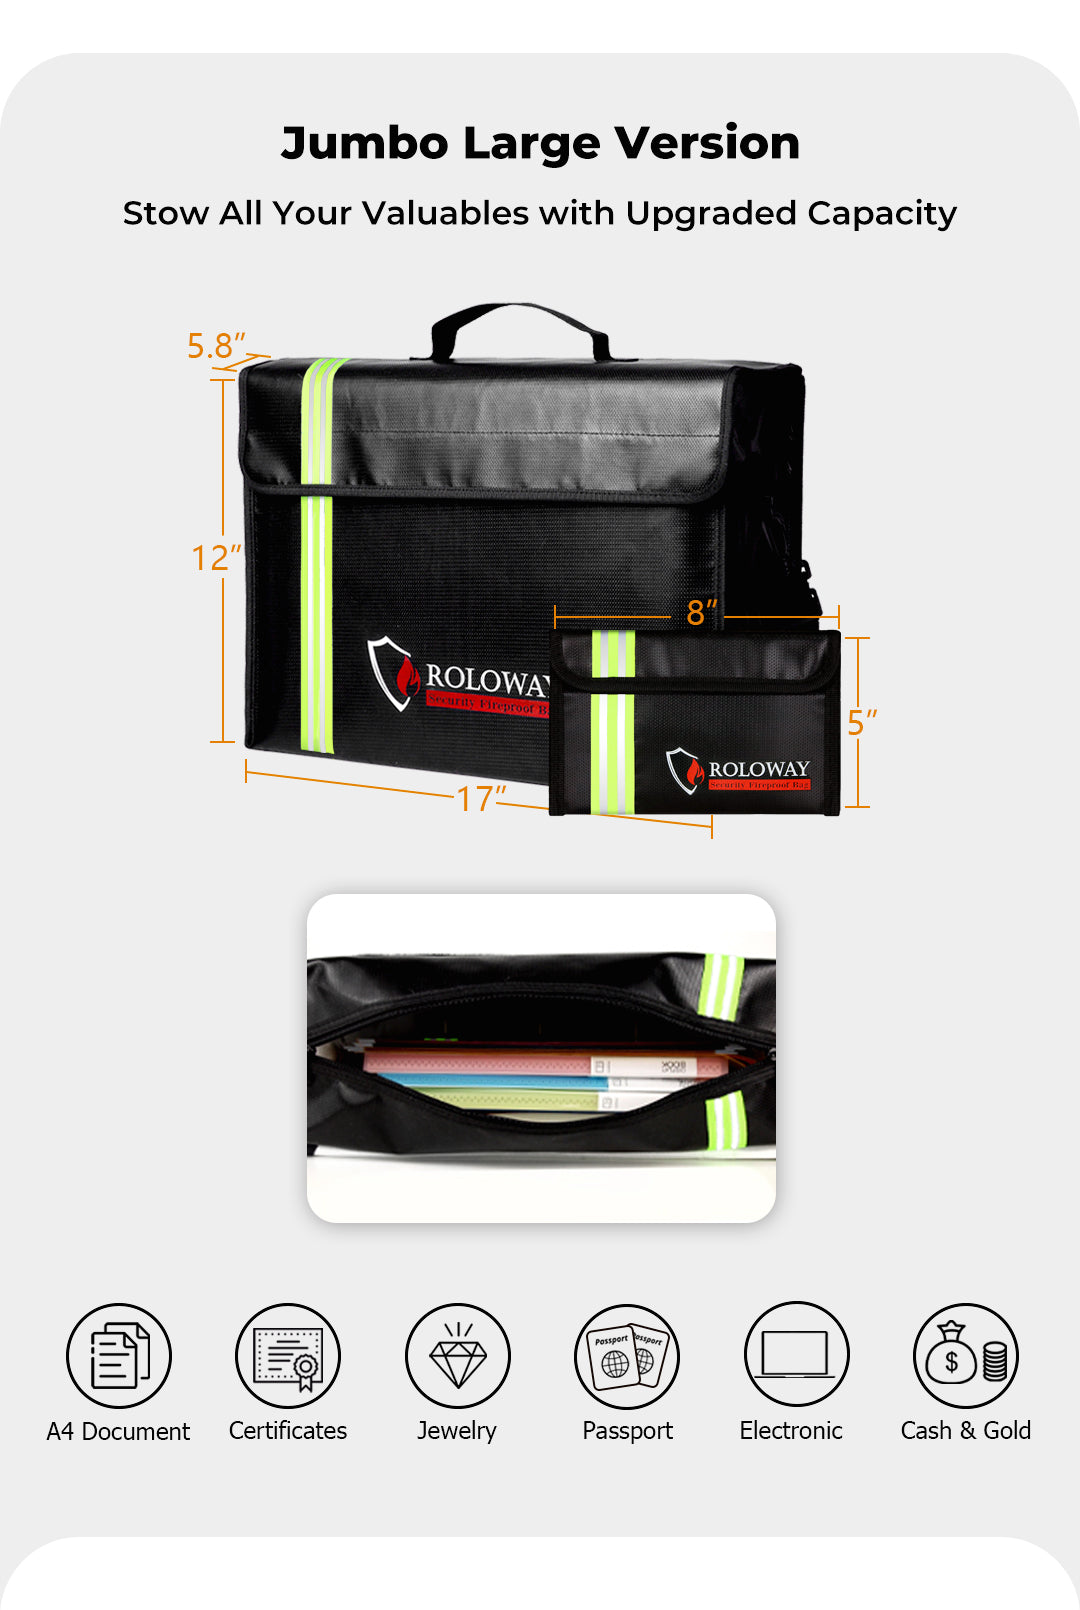 ROLOWAY JUMBO Fireproof Bag with Reflective Strip, 17 x 12 x 5.8 inches6